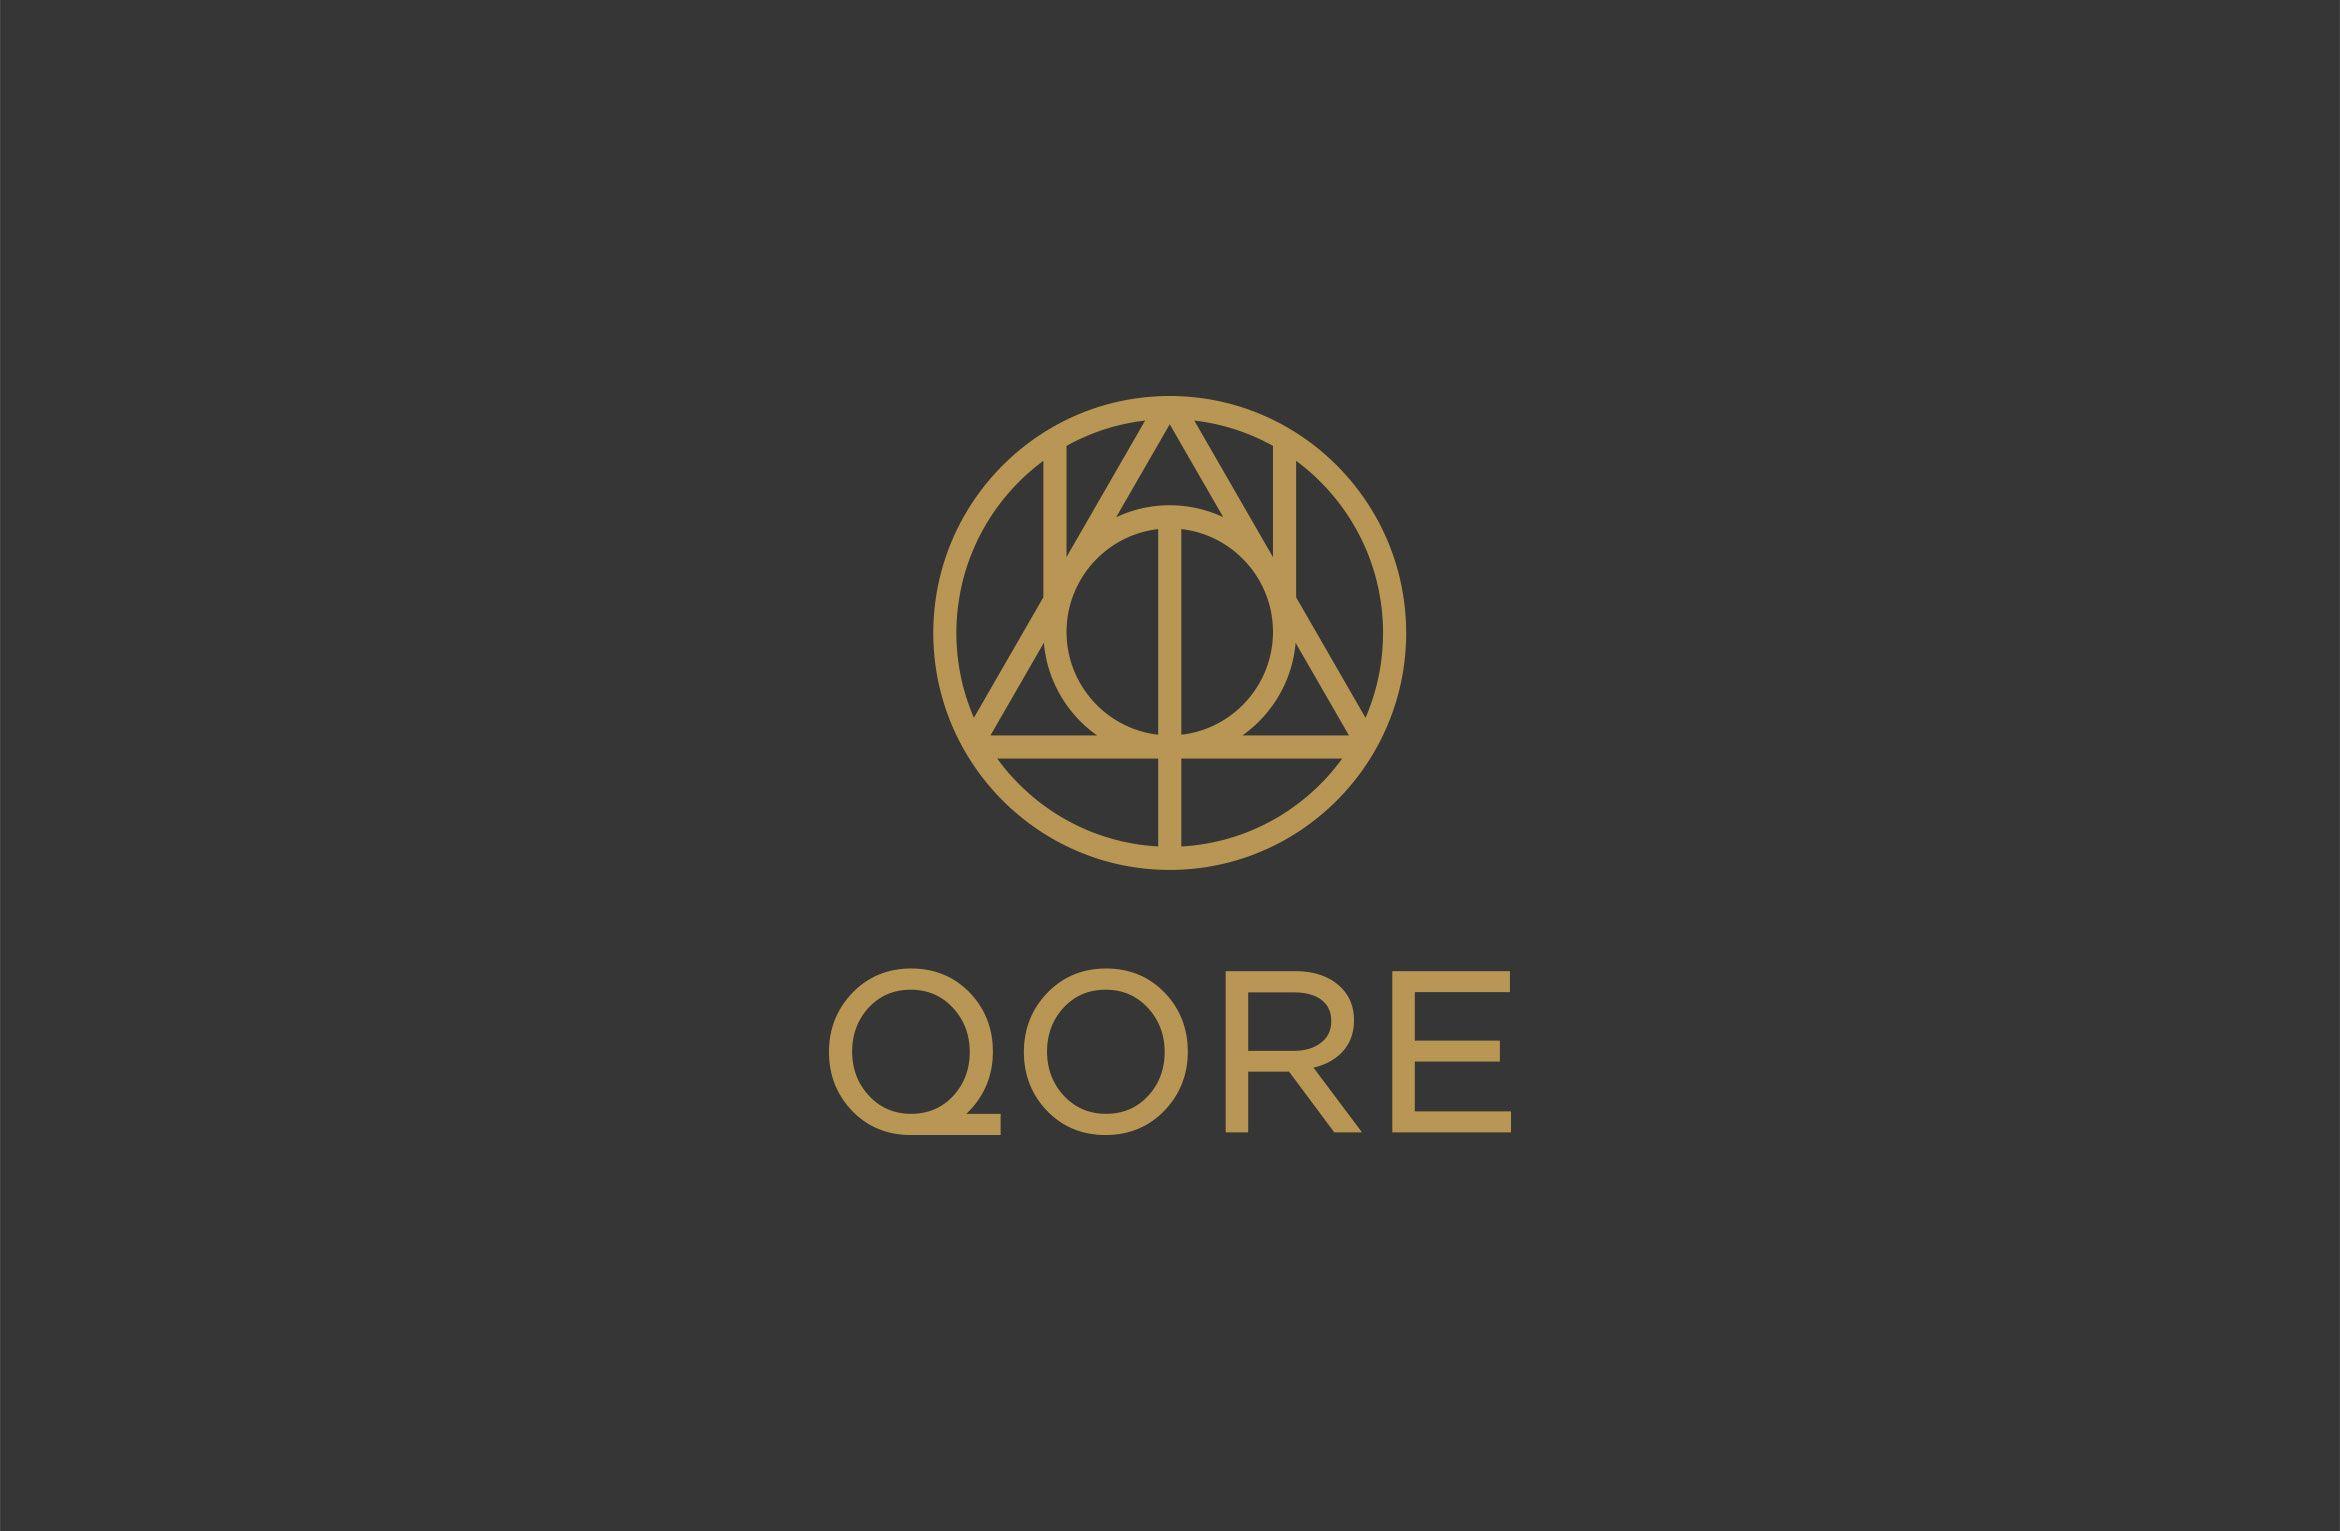 Gray and Gold Logo - TRÜF : QORE Brand Identity, Website & Collateral Design